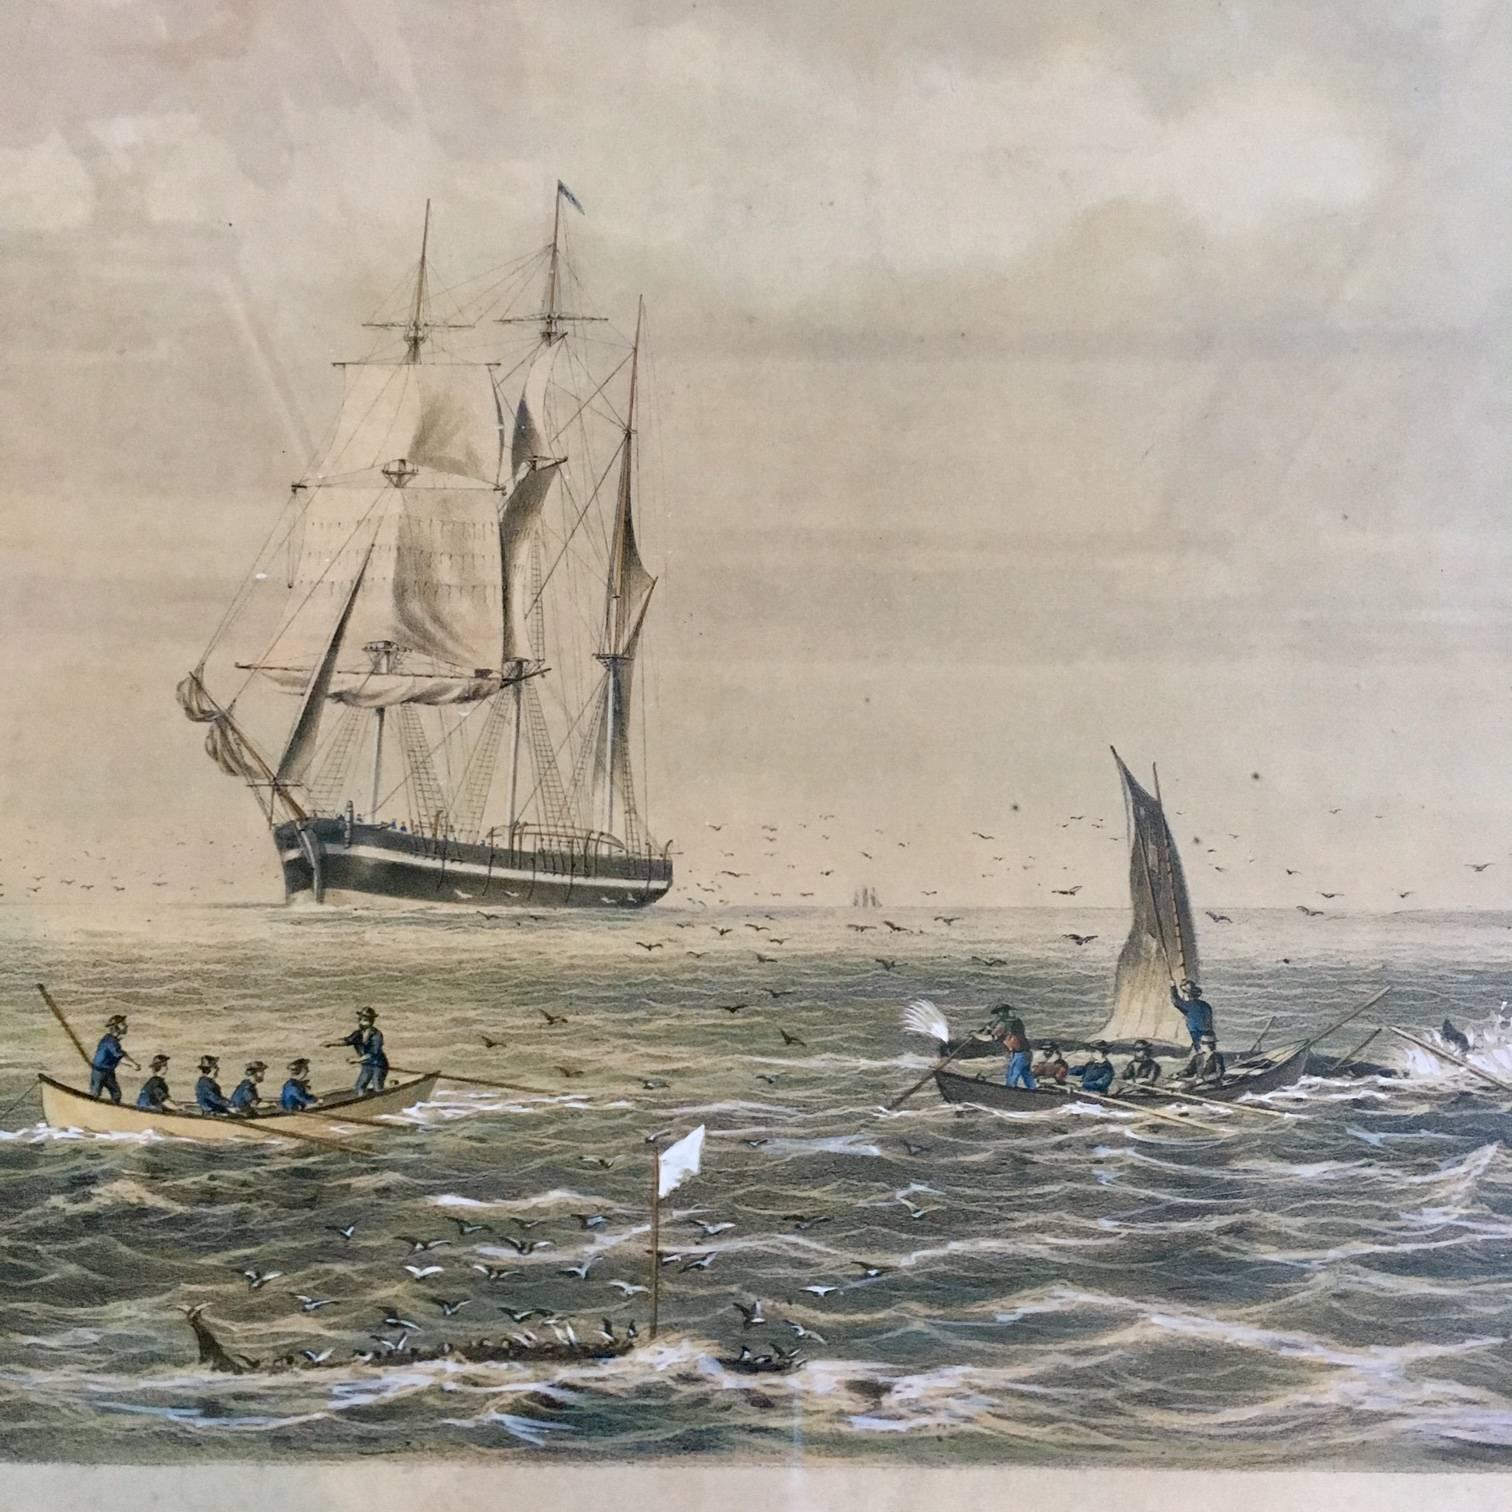 Fine colored lithograph of Sperm Whaling with its Varieties, after Original by Benjamin Russell (New Bedford: 1804-1885), Published by John Henry Bufford (Boston: 1810-1870), Artist’s Proof printed in 1870, a colored lithographed finished by hand,